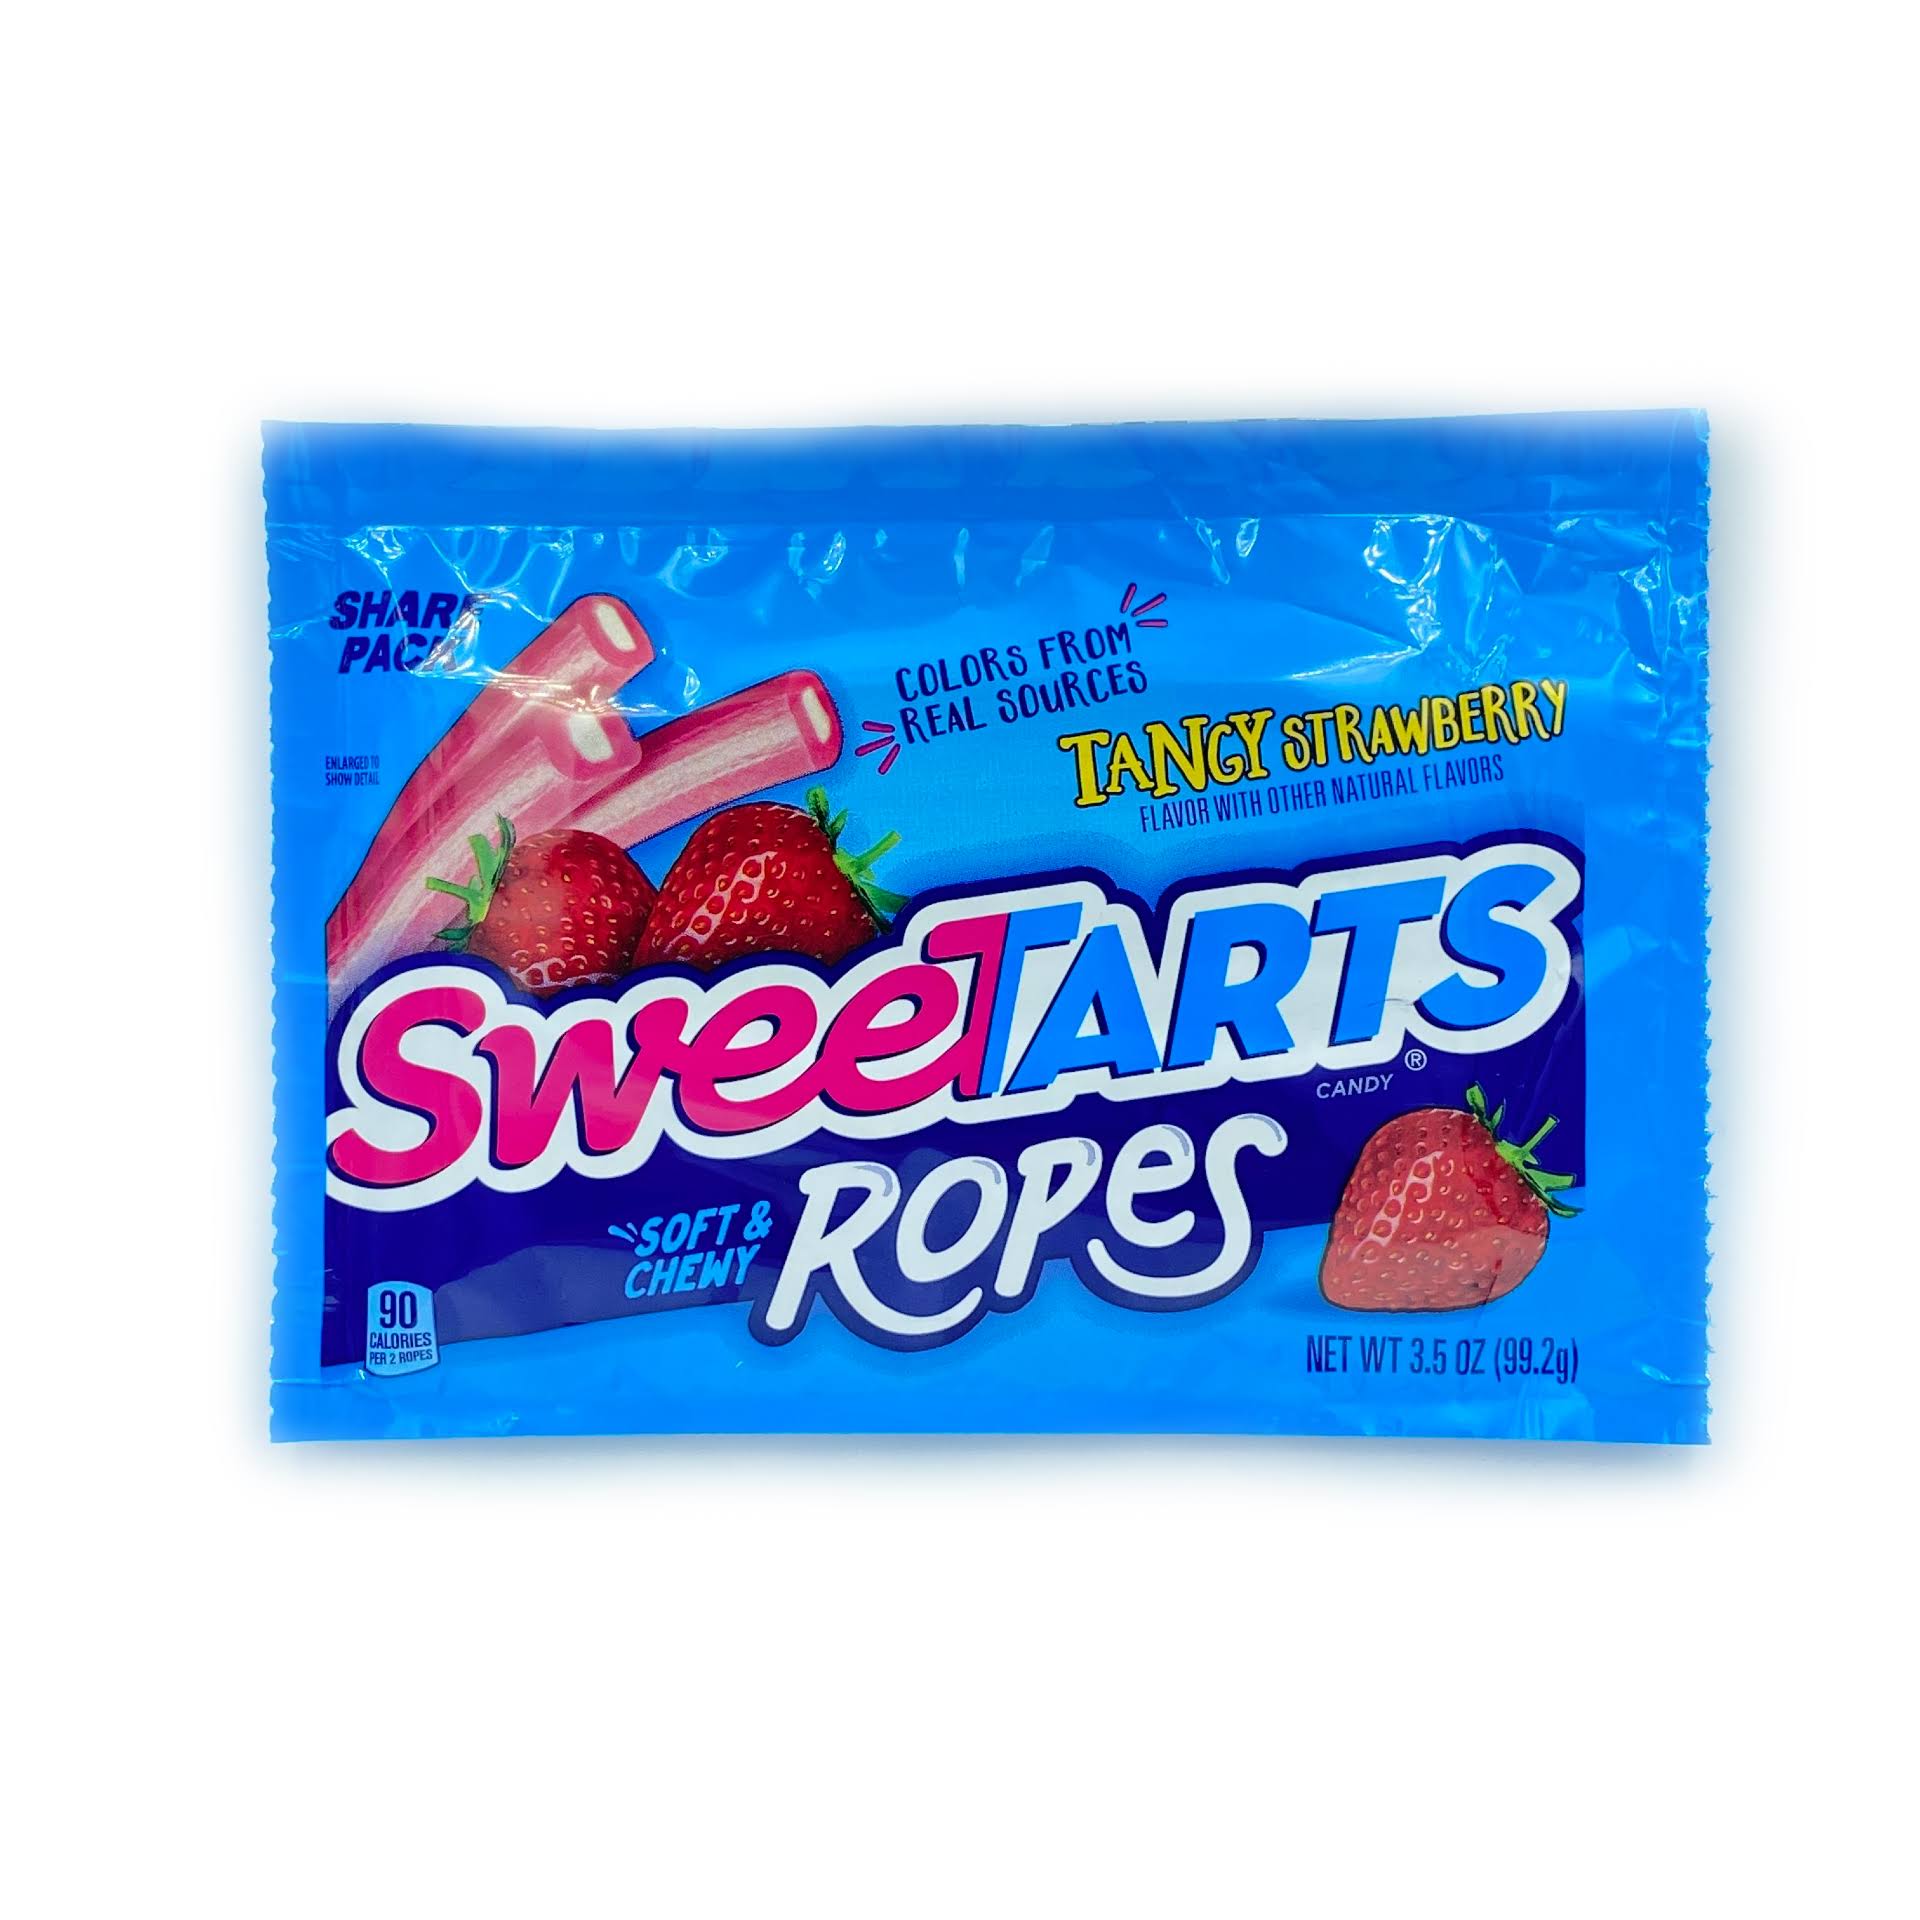 Sweetarts Rope Tangy Strawberry Share Size